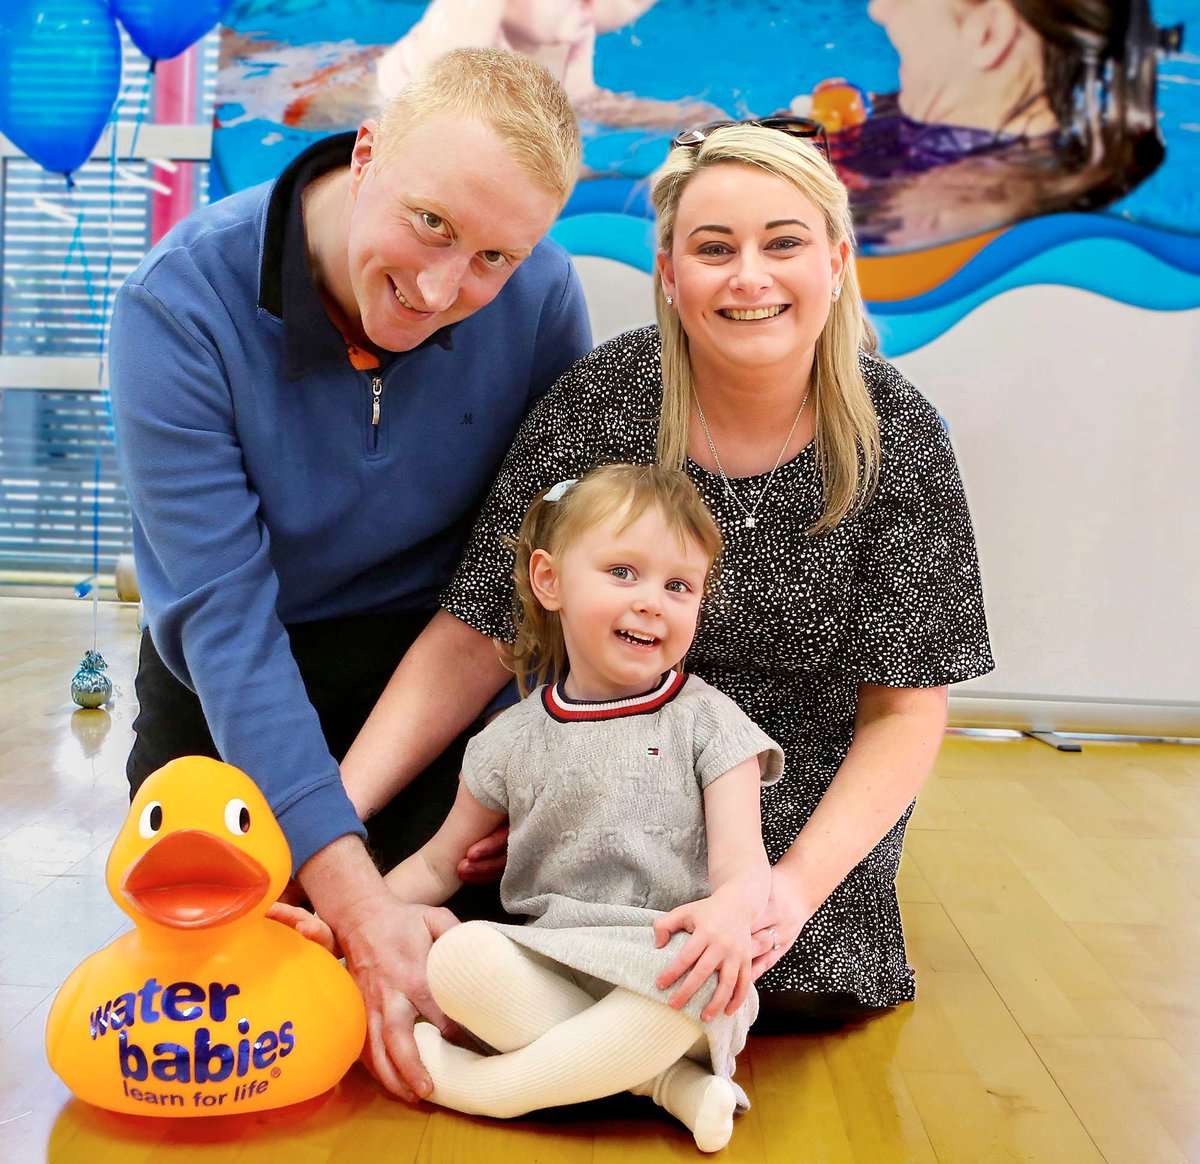 Fearless Killarney toddler Rachel Nolan is already swimming like a pro and showing exceptional prowess at her swimming lessons each week – the two-year-old was one of 14 Water Baby Heroes awarded at a special event in Dublin last week.